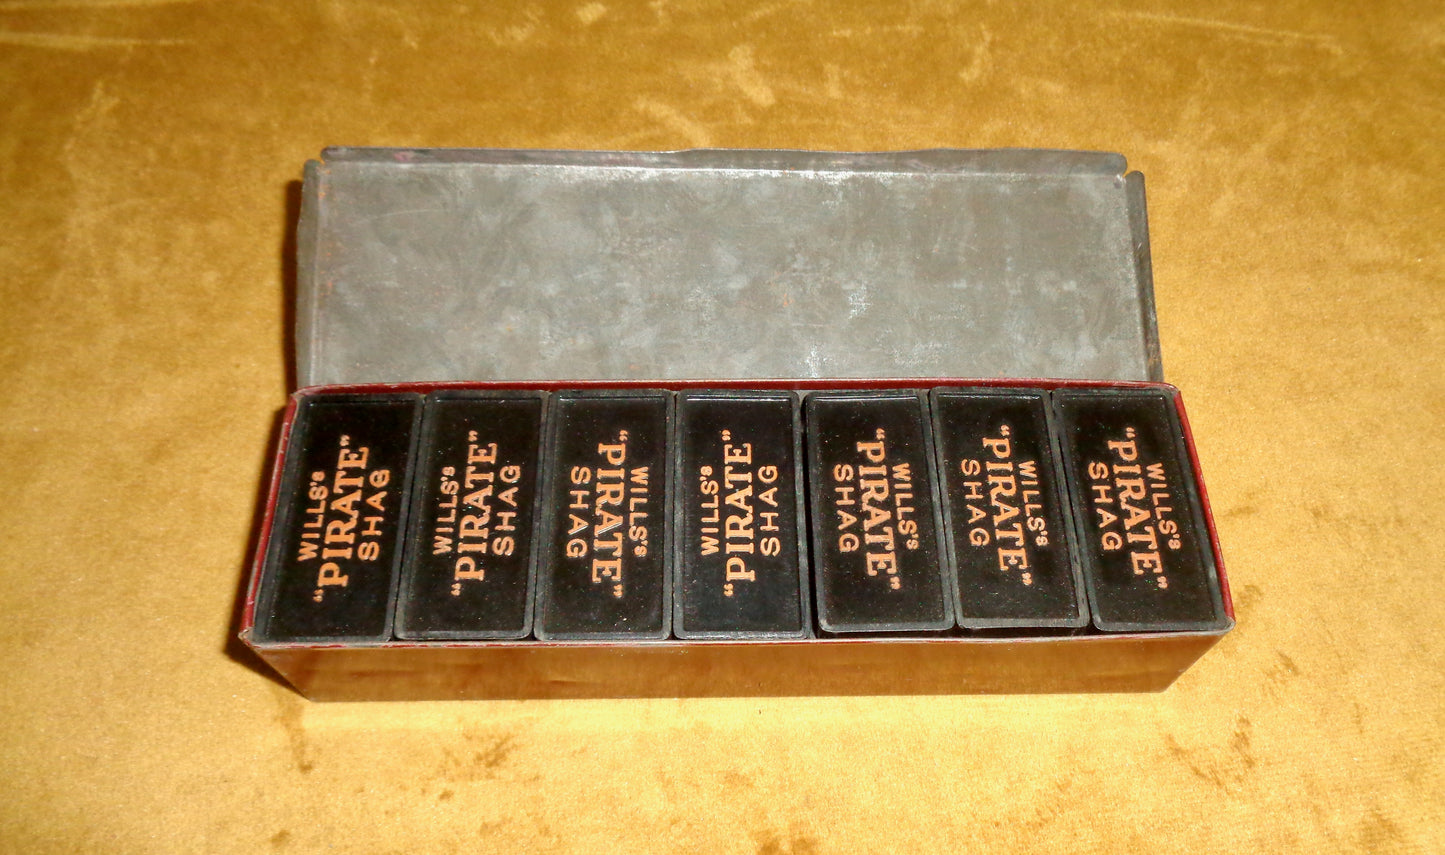 Set of 28 Wills's Pirate Shag Dominoes Empire Size In Tin Box